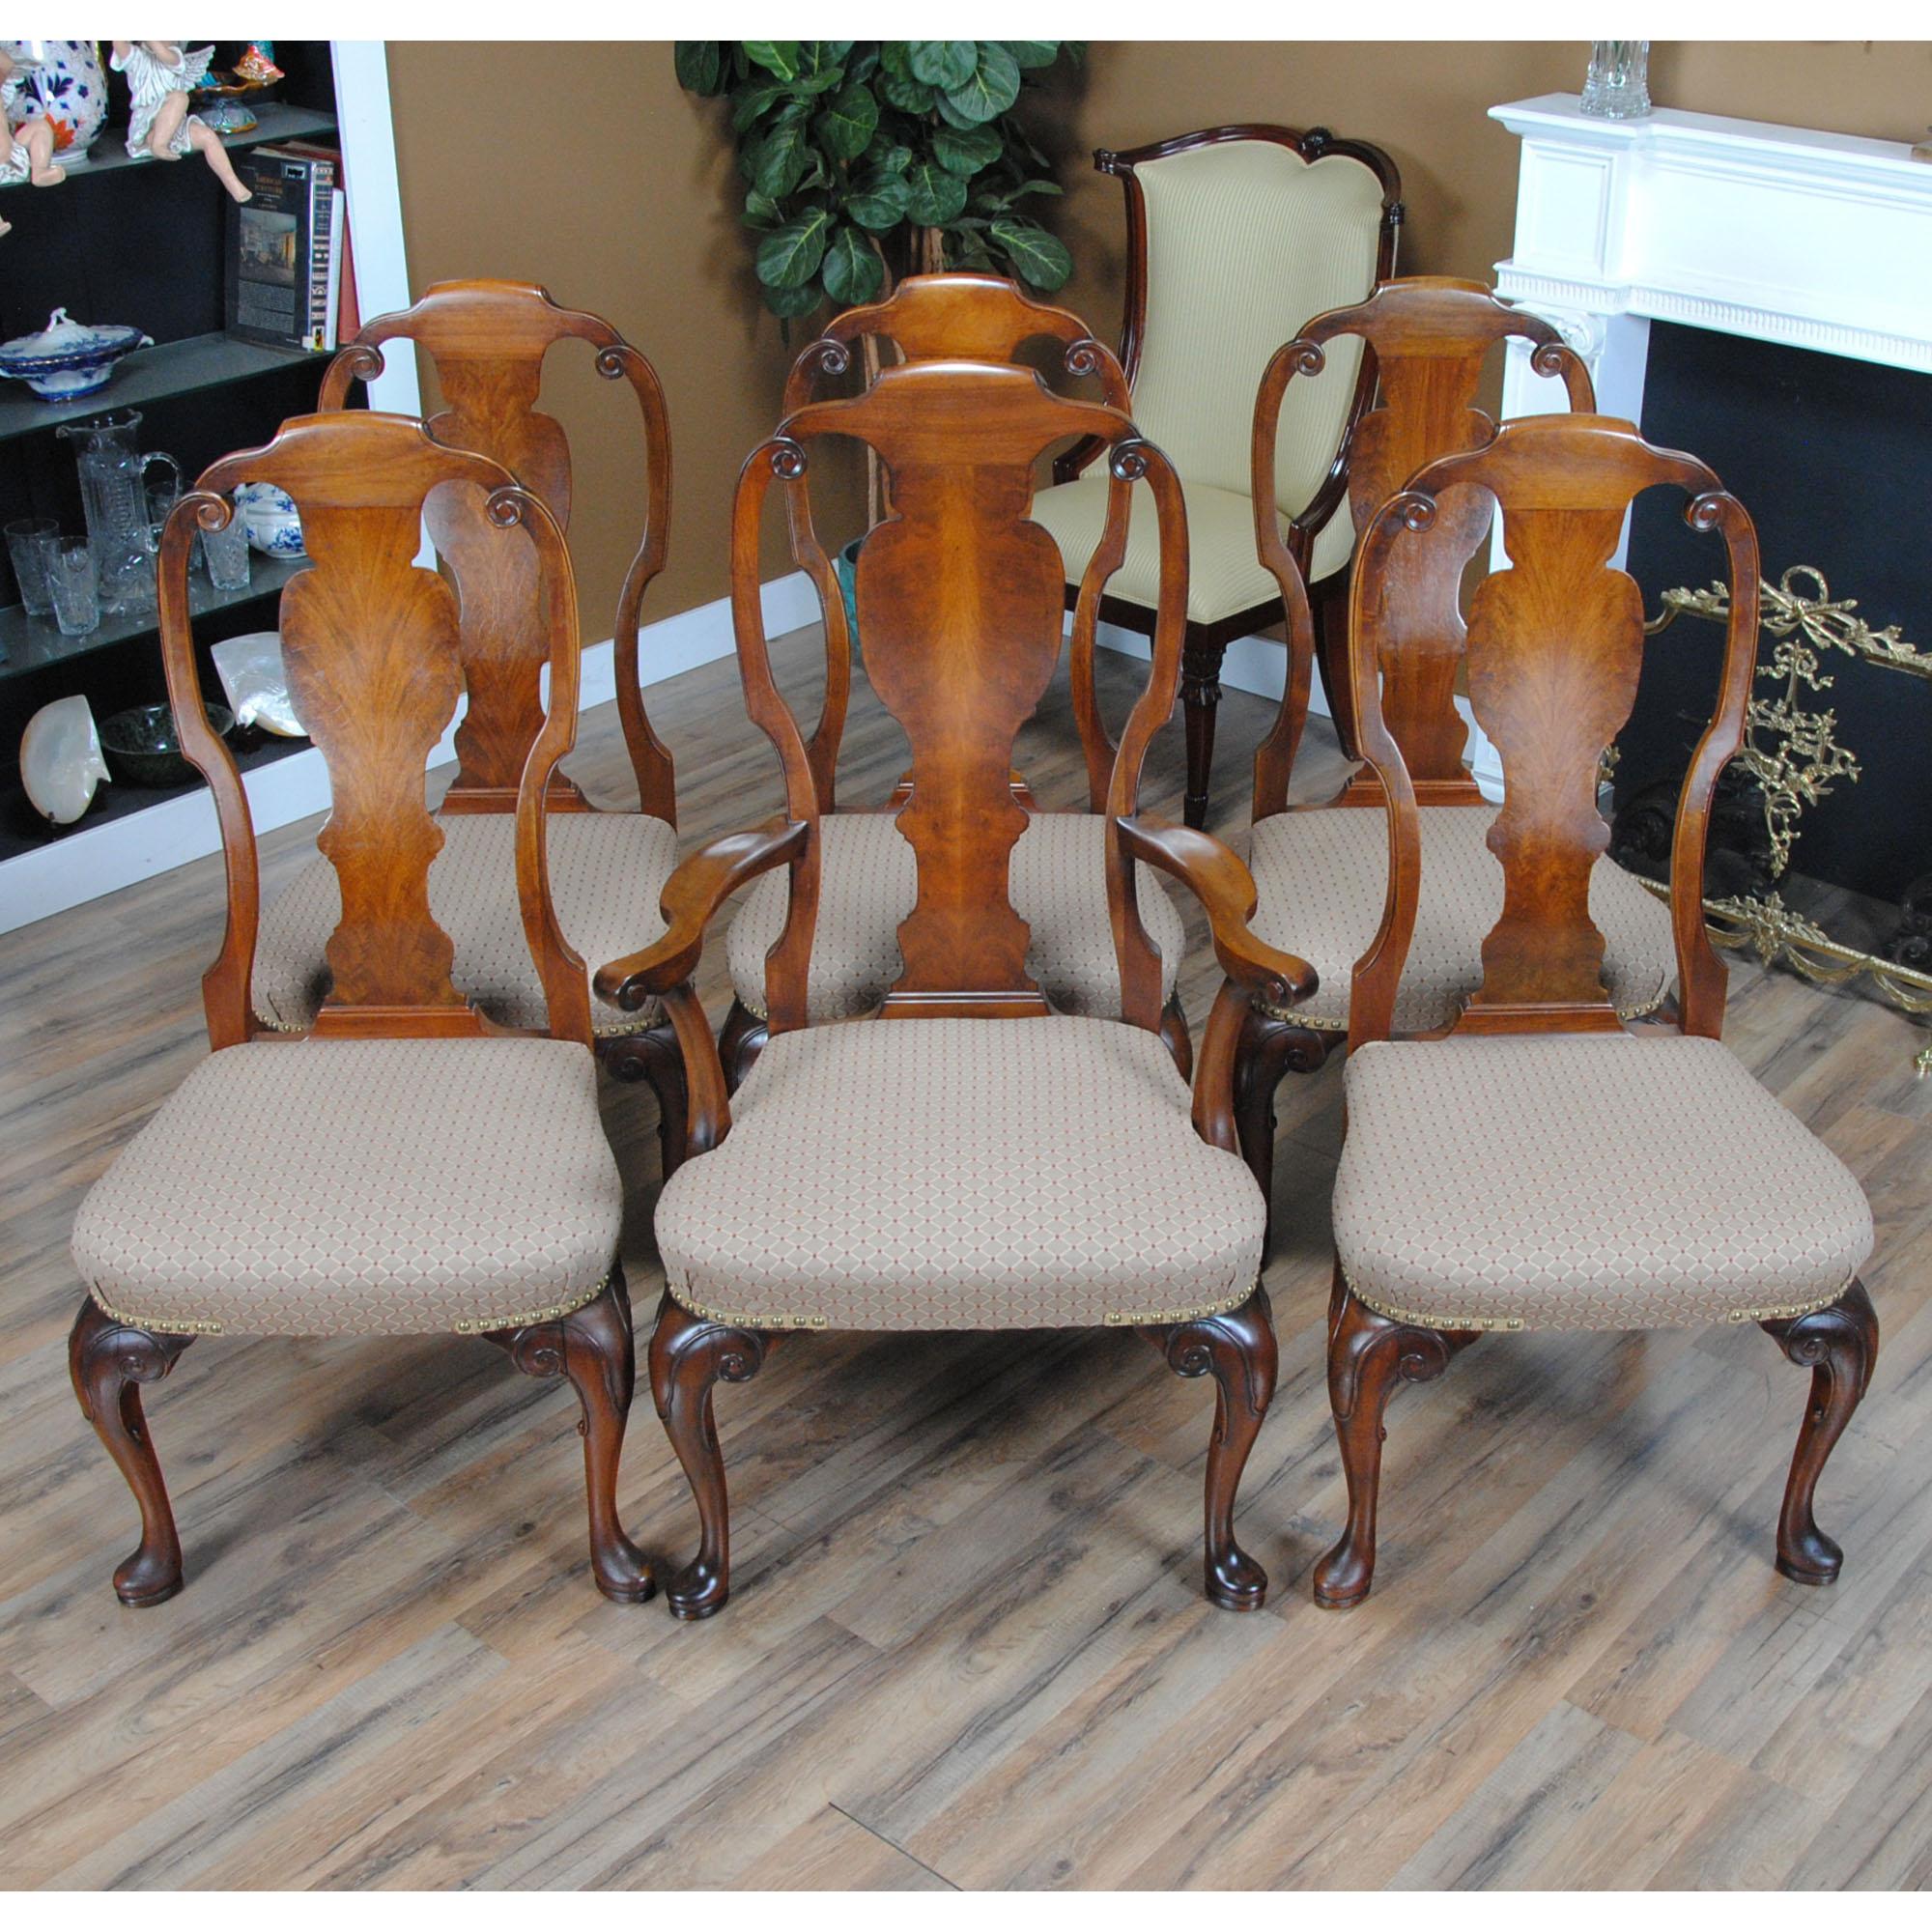 A Berkey and Gay Set of 6 Vintage Chairs in excellent condition.

Both elegant and incredibly detailed this beautiful Berkey and Gay Set of 6 Vintage Chairs have everything one could ask for in chairs created for the dining room.

The Berkey and